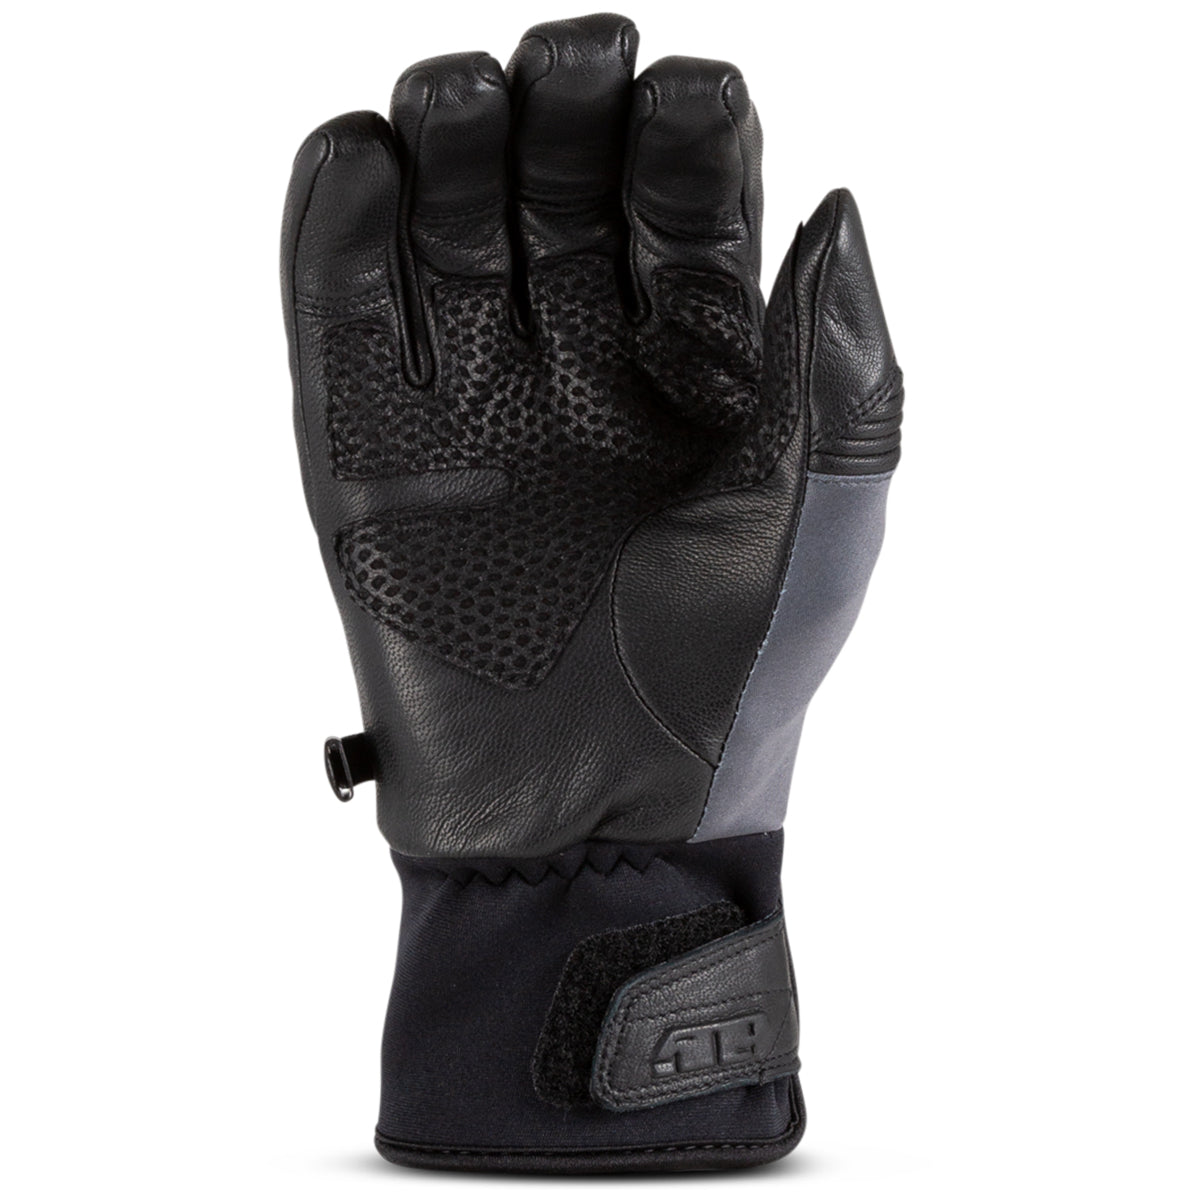 Free Range Glove W23 Black Friday Limited Edition - The Parts Lodge